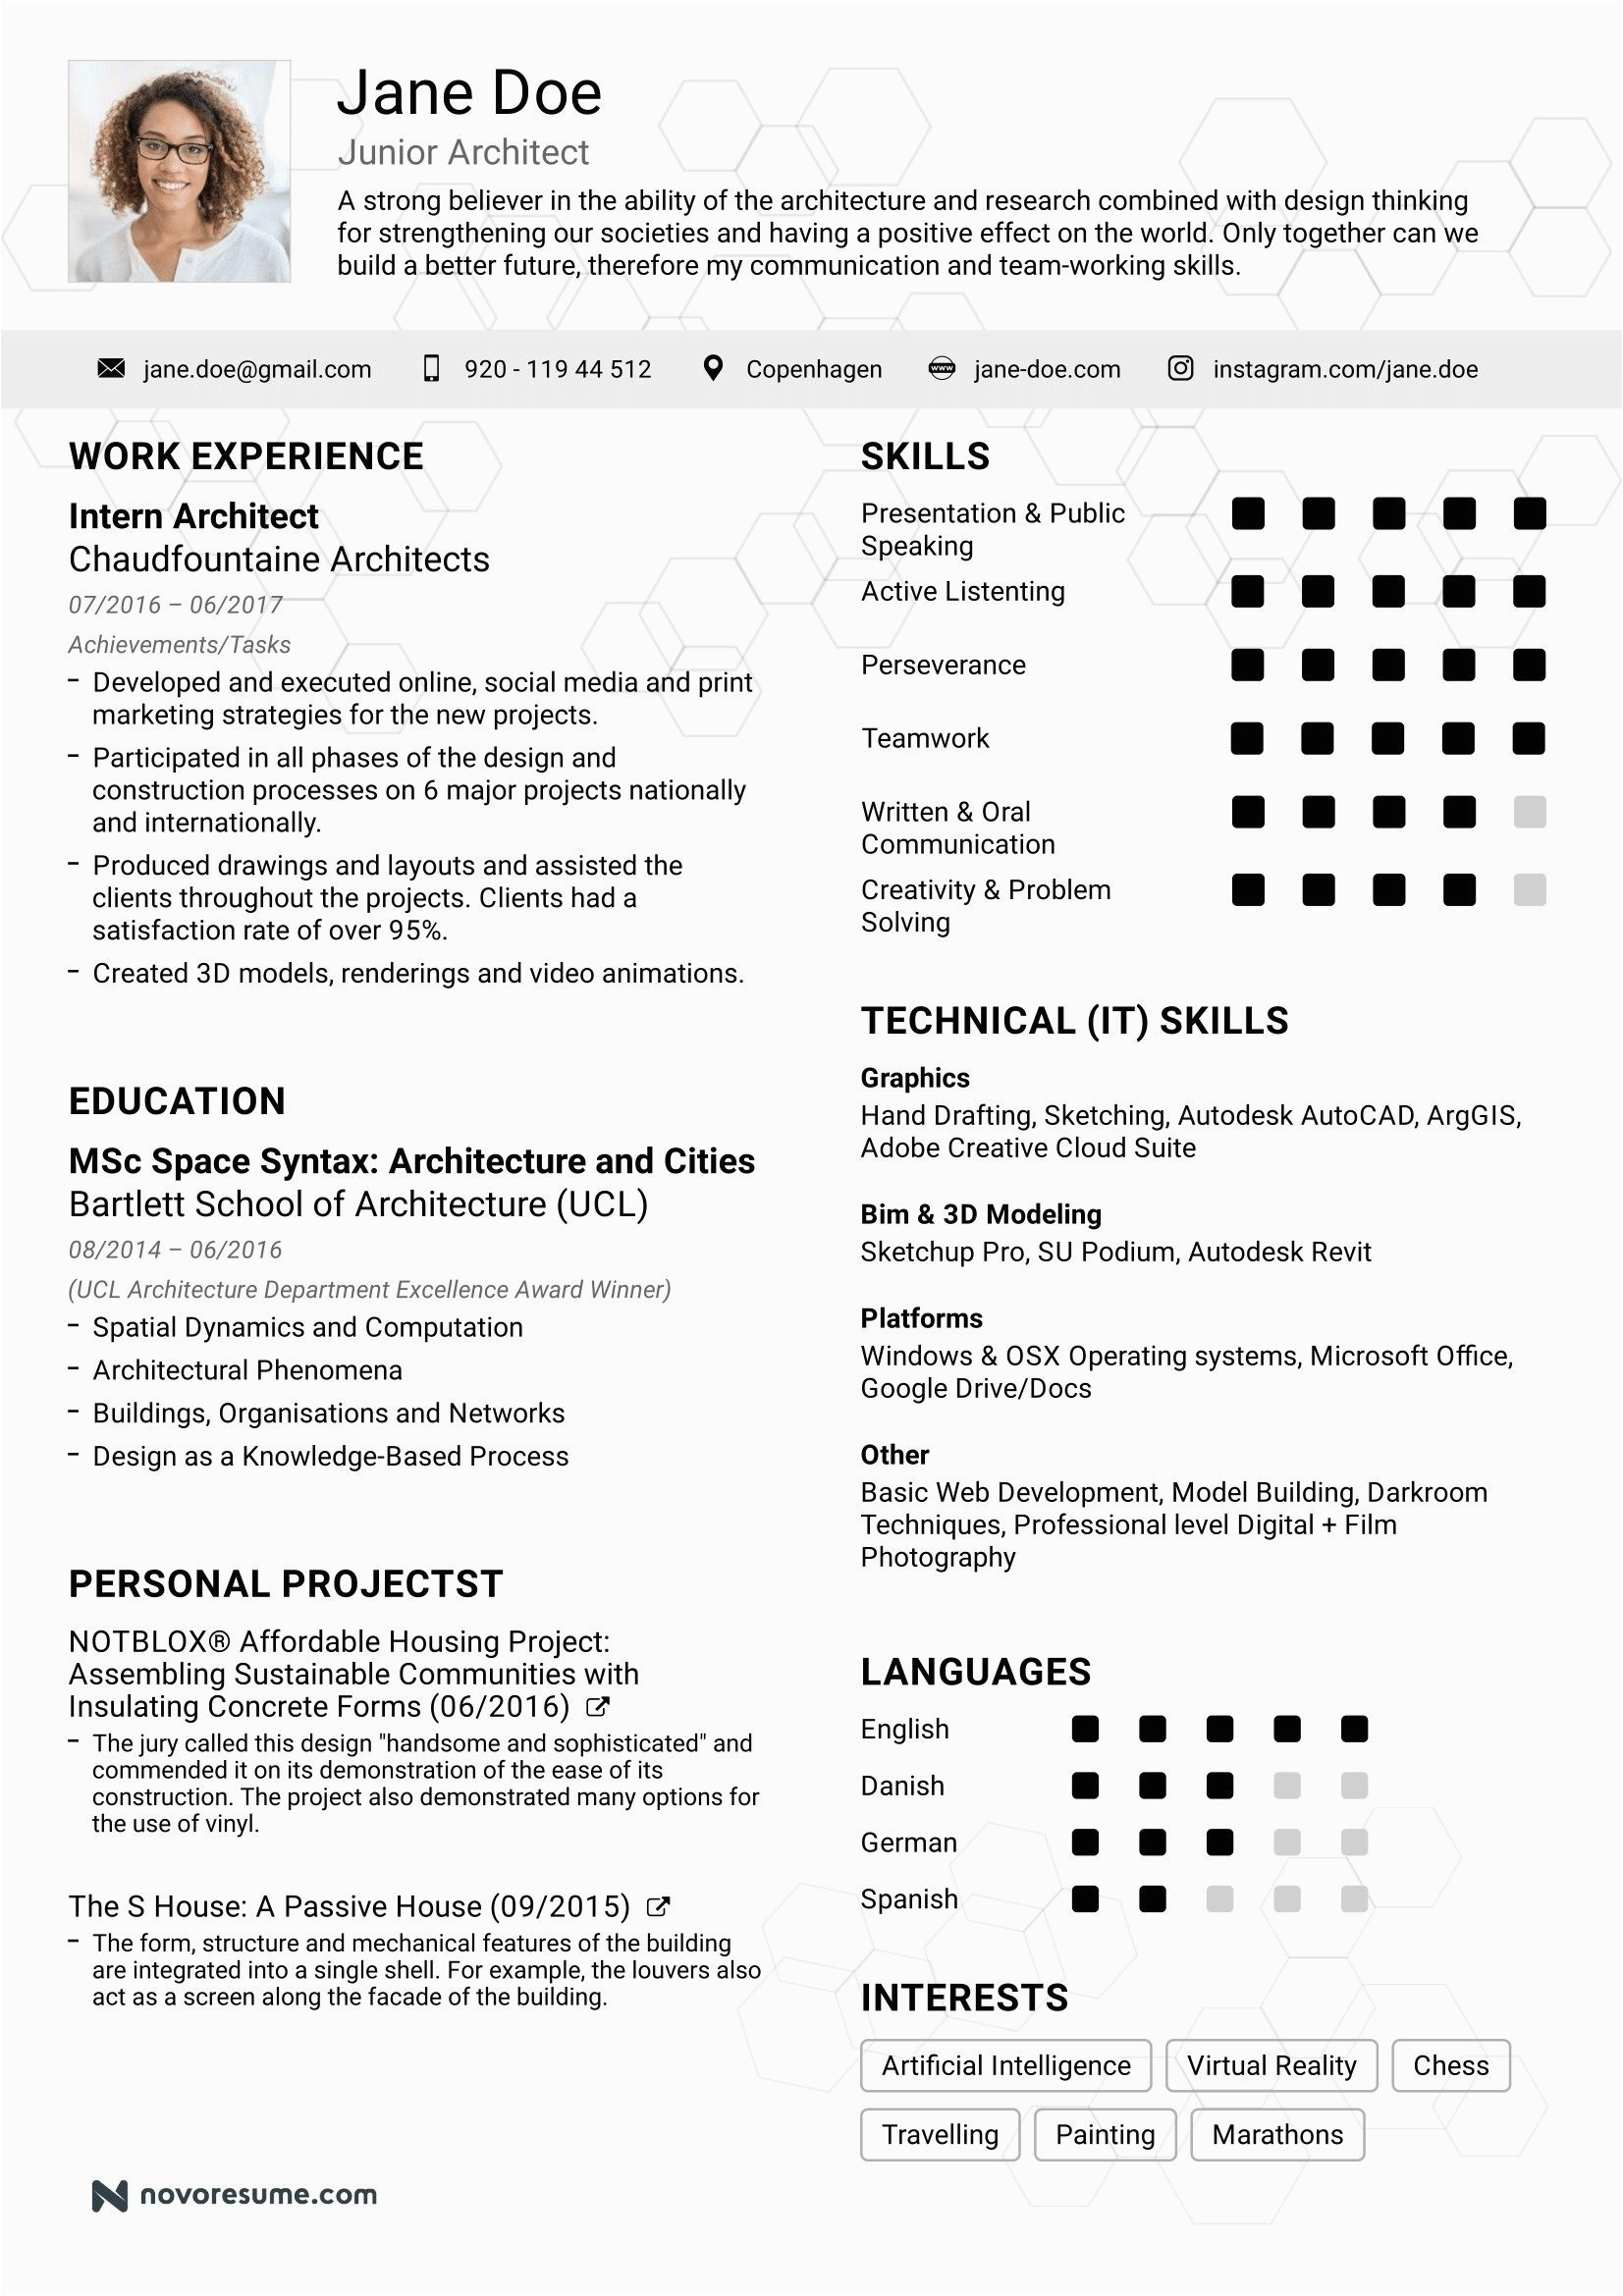 Samples Of Different Styles Of Resumes the Best Ideas for Resume Styles 2019